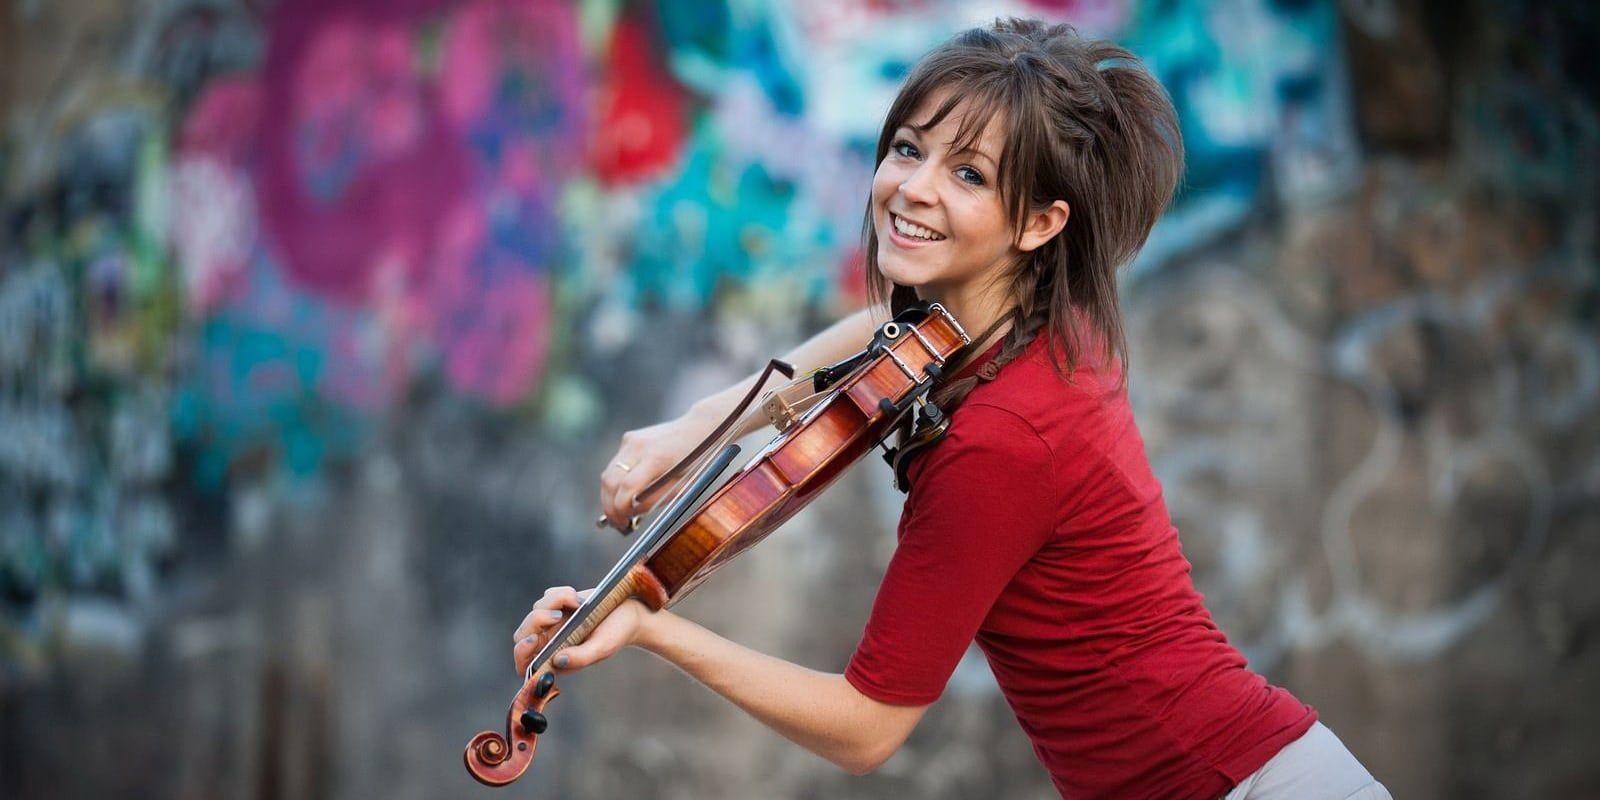 Who's Lindsey Stirling from Dancing with the Stars? Wiki: Net